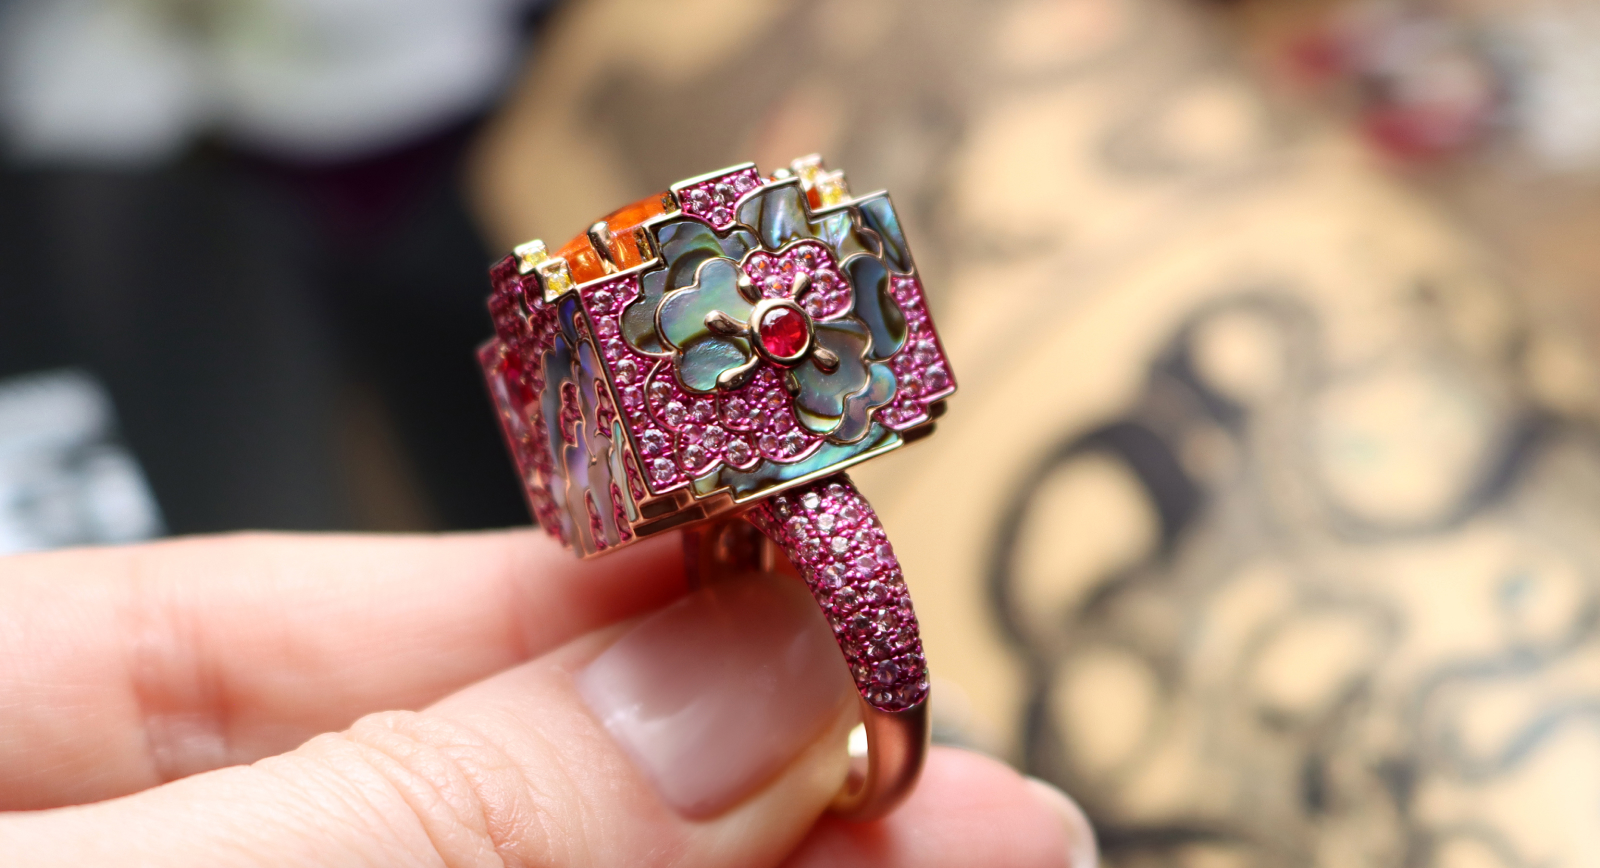 Austy Lee ‘The Night of Floréal’ ring from The Sanctus-cubes collection in 18K rose gold with Fanta spessartite garnet, Mozambican unheated rubies, abalone shell and fancy colour diamonds